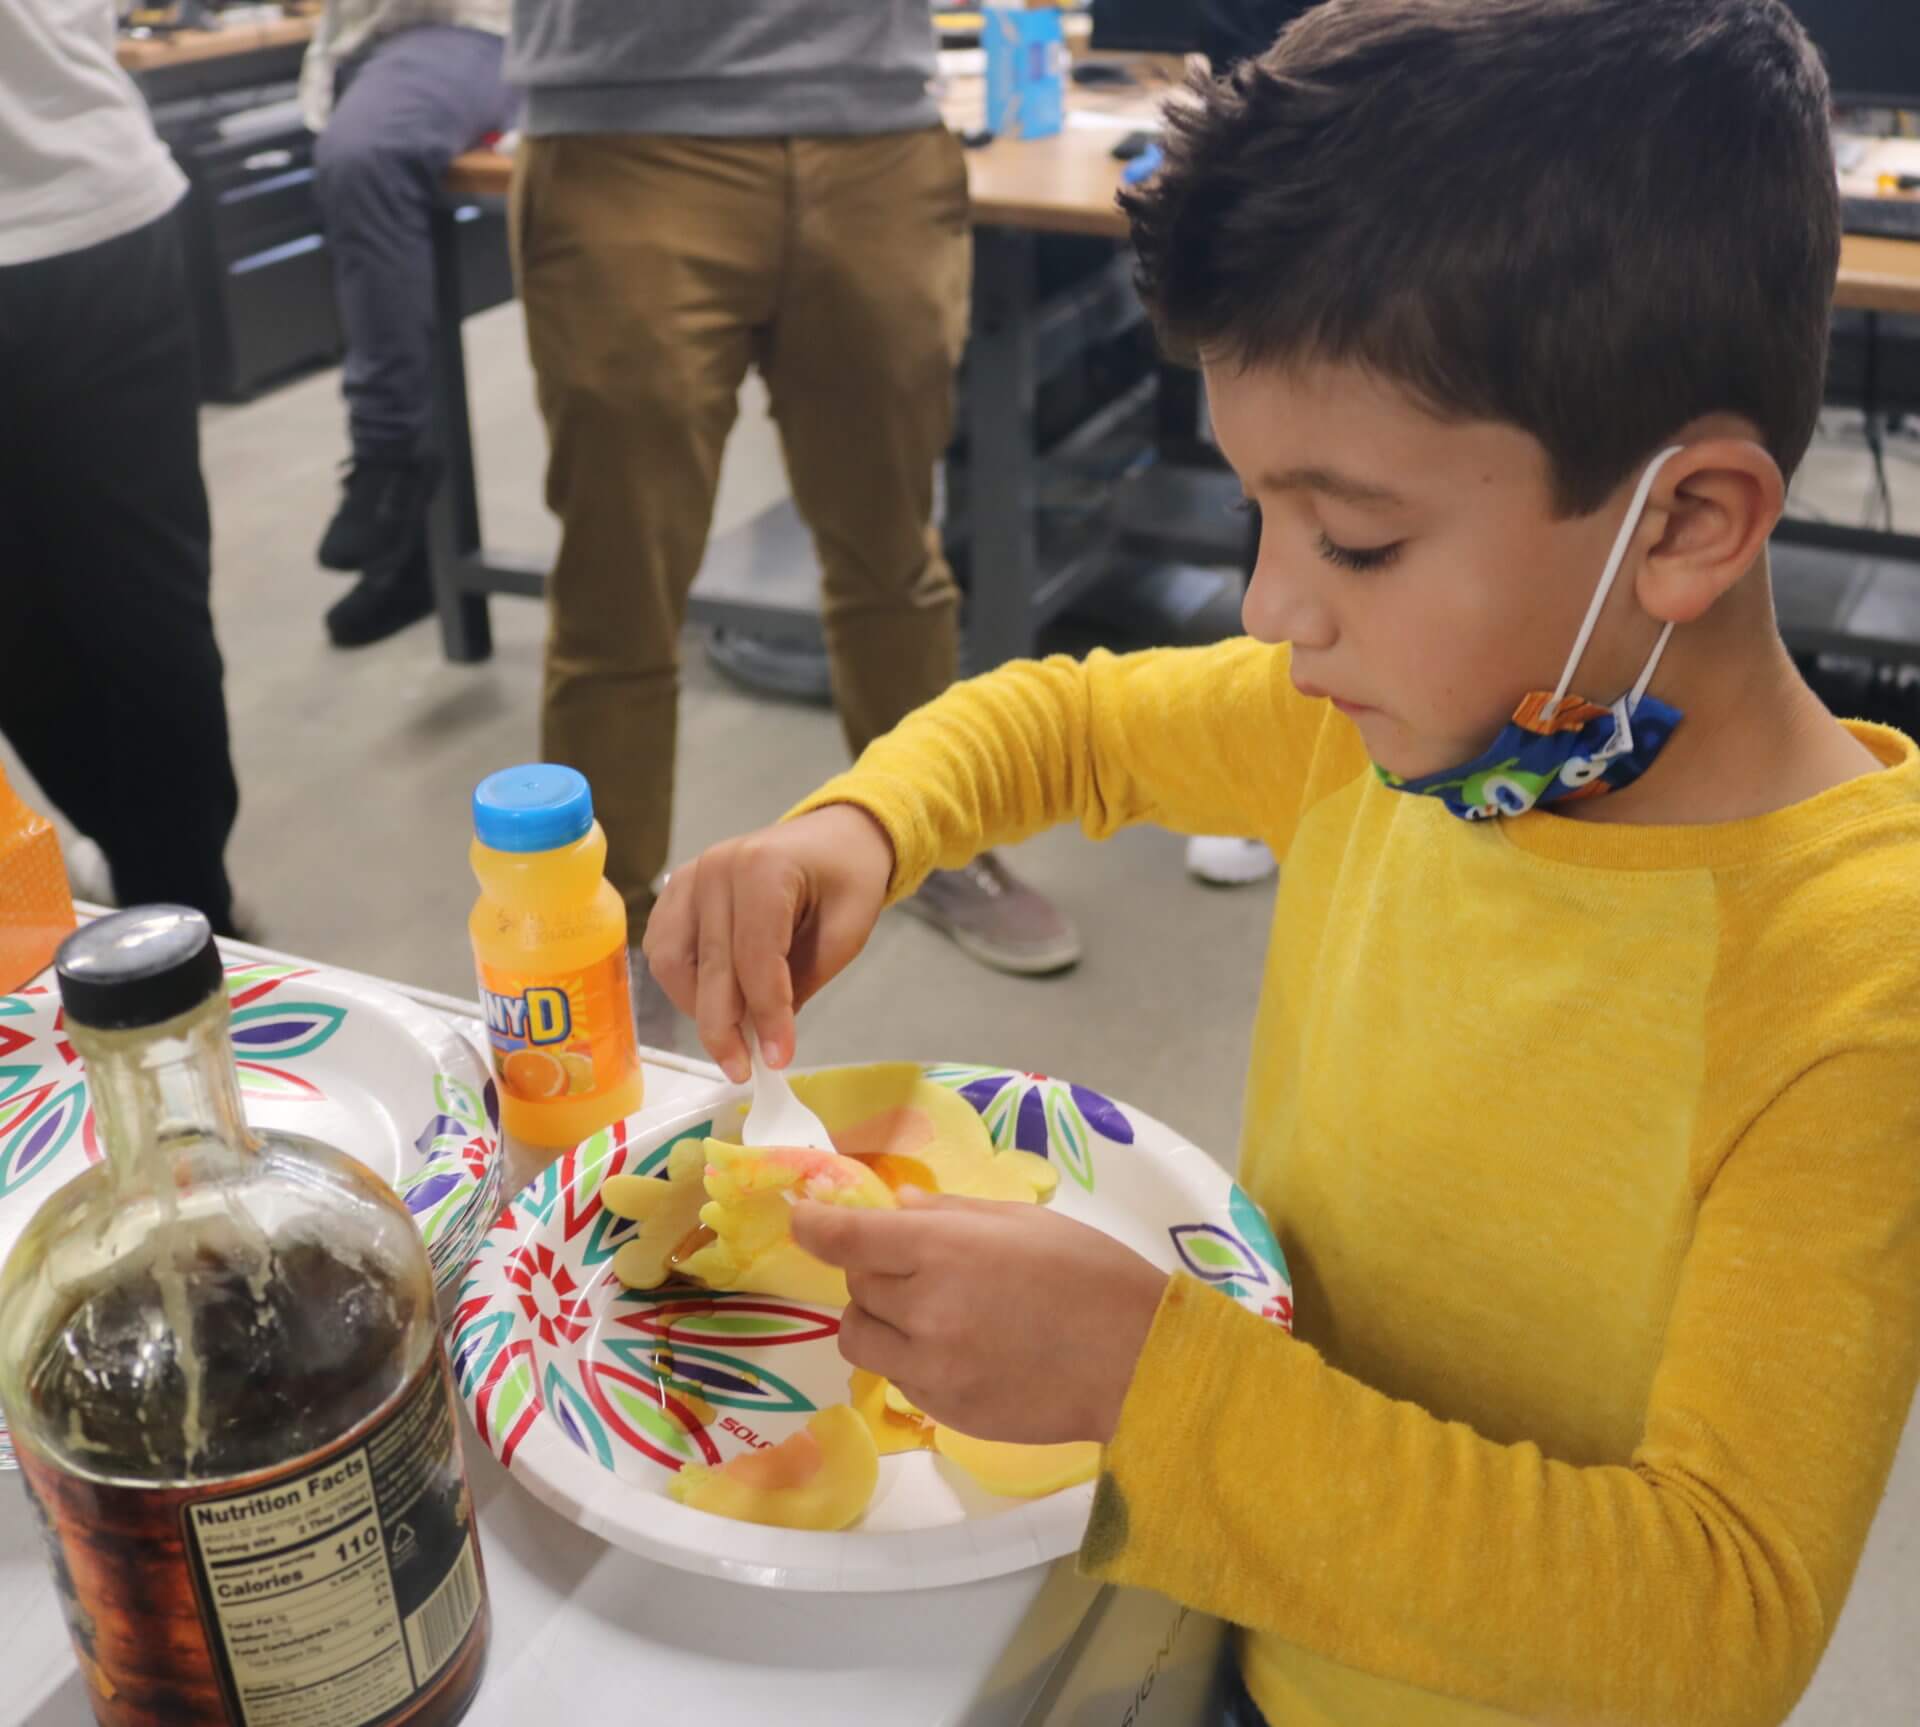 A young visitor enjoys a bunny-shaped pancake made by the Baxter robot. PHOTO/AVNI SHAH.